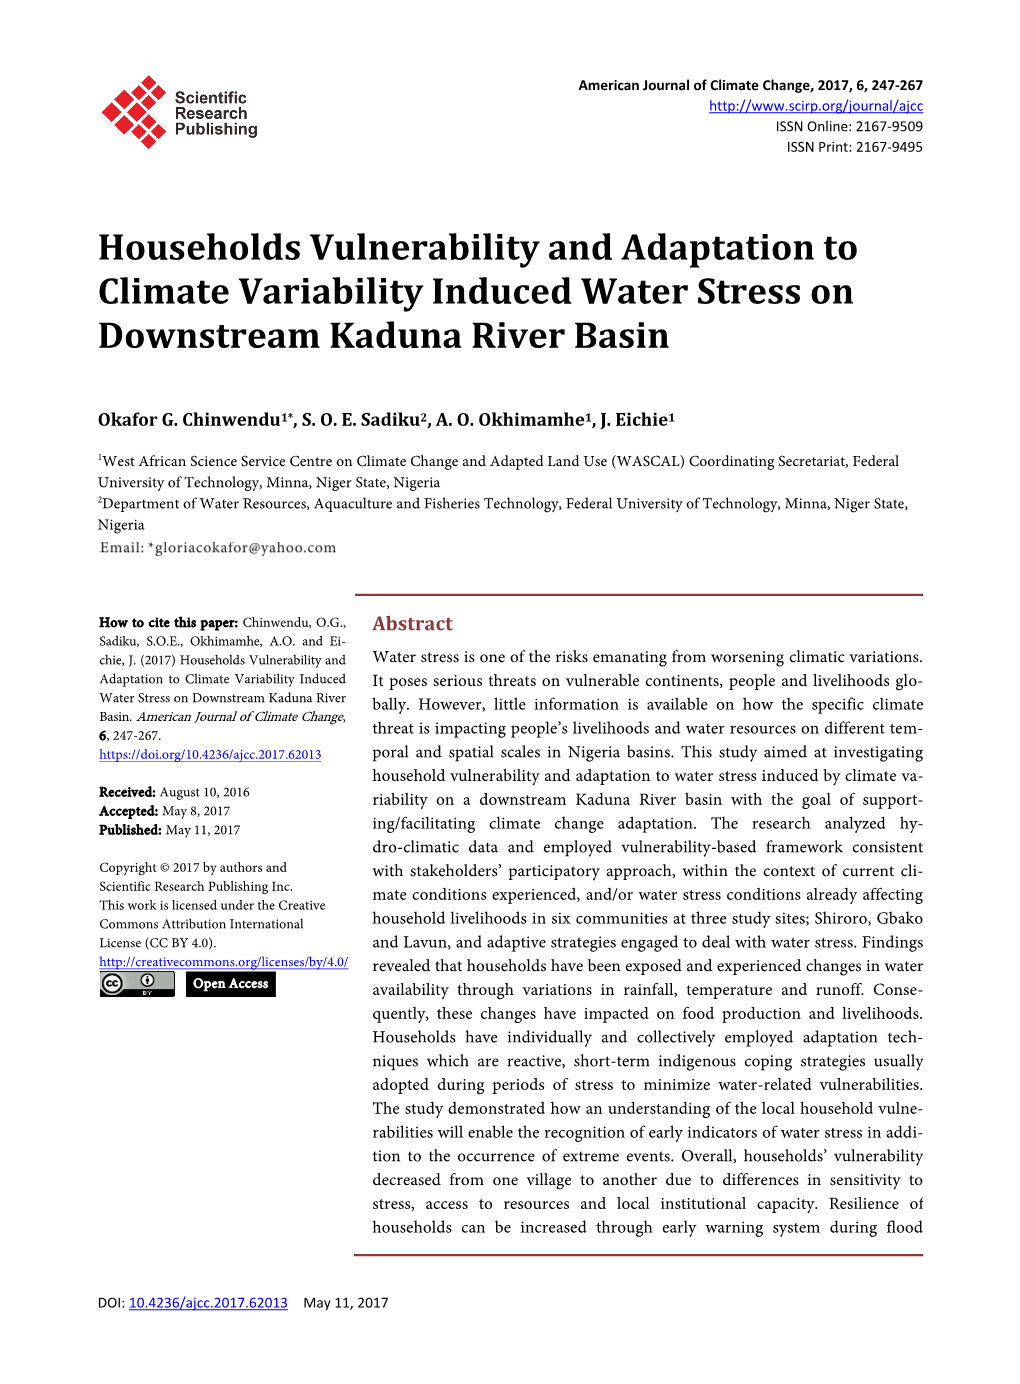 Households Vulnerability and Adaptation to Climate Variability Induced Water Stress on Downstream Kaduna River Basin